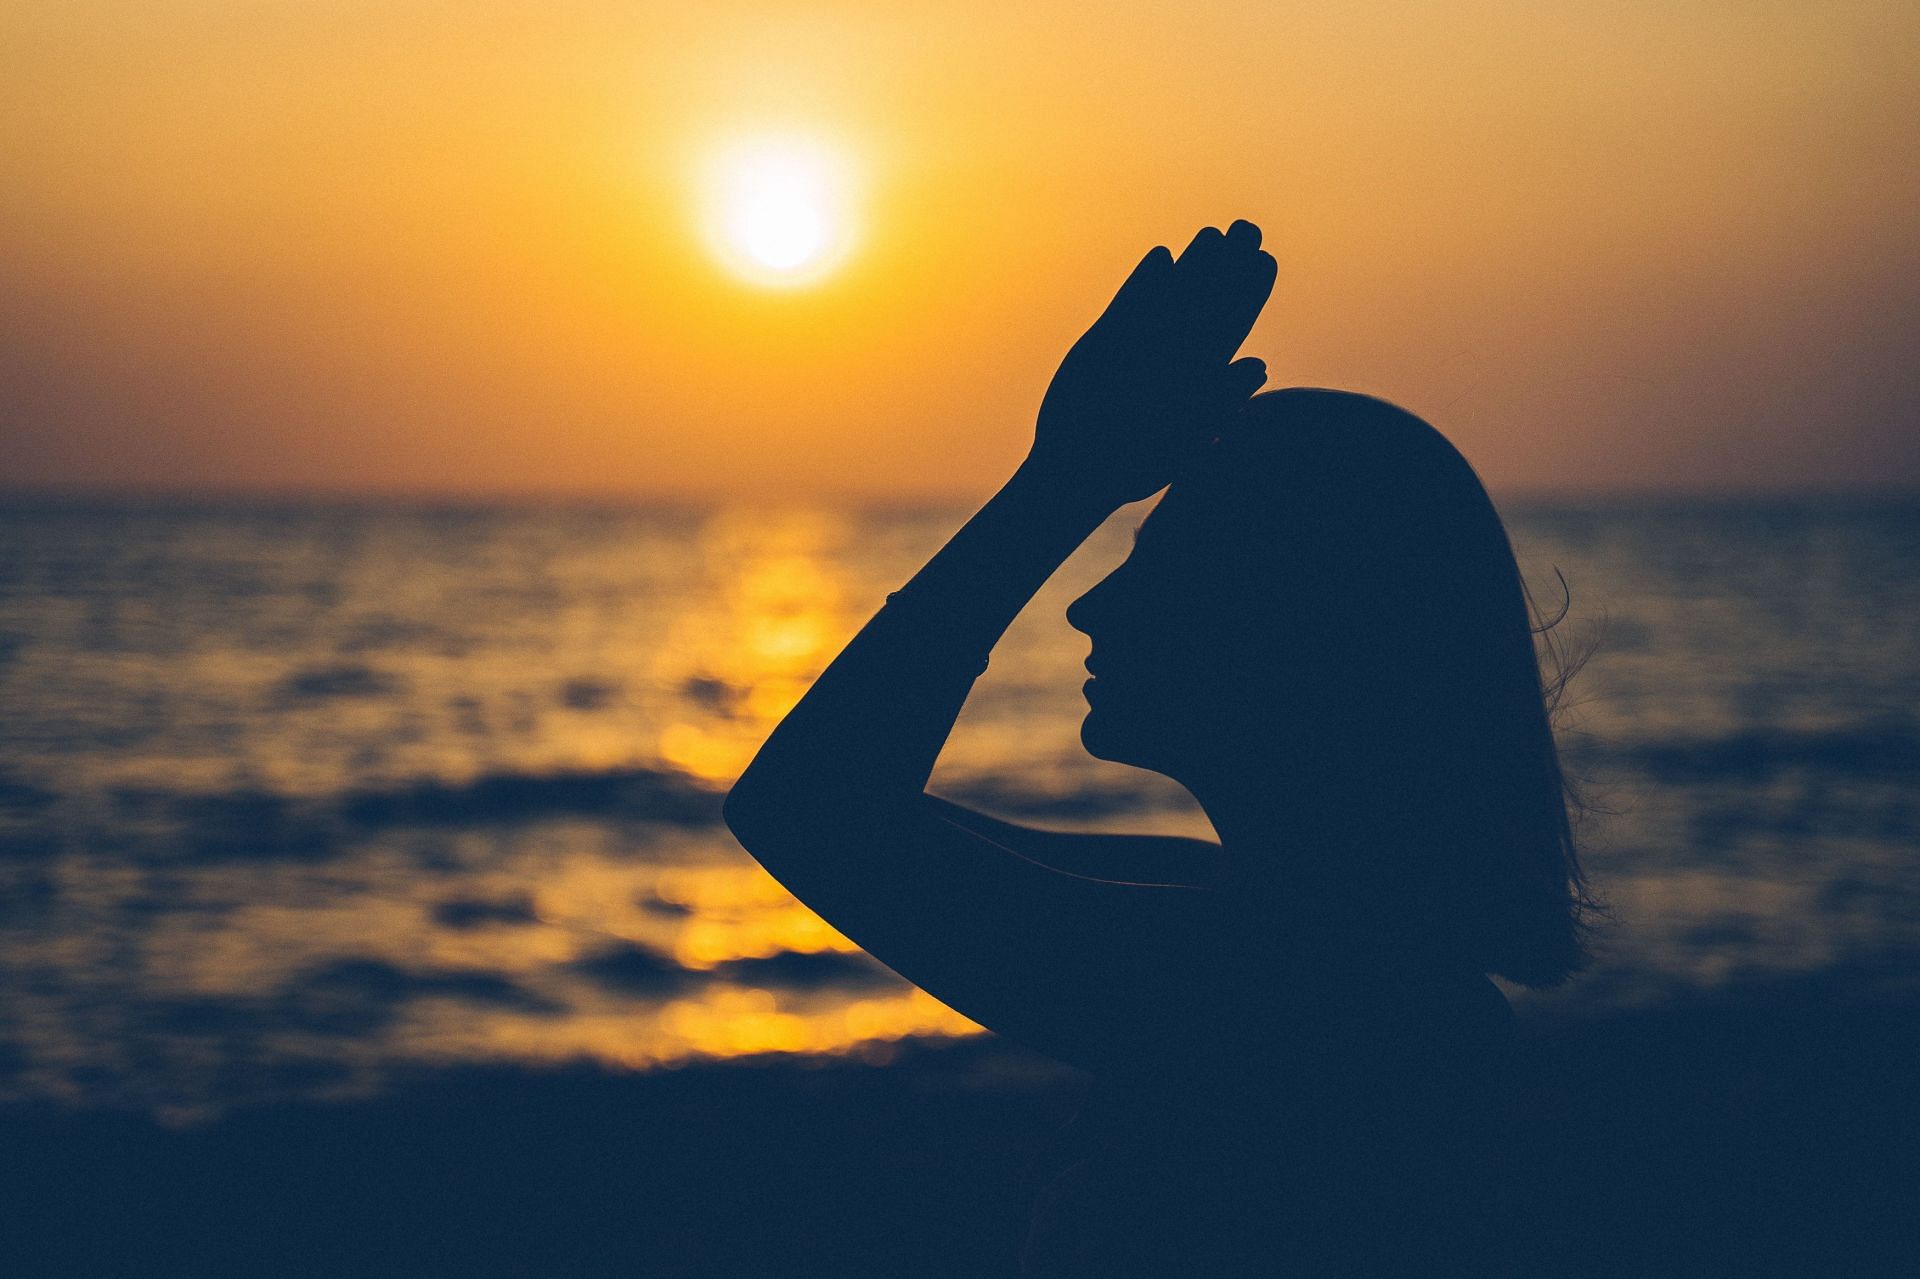 How can you incorporate mindfulness every day? (Image via Pexels/Anna Tarazevich)